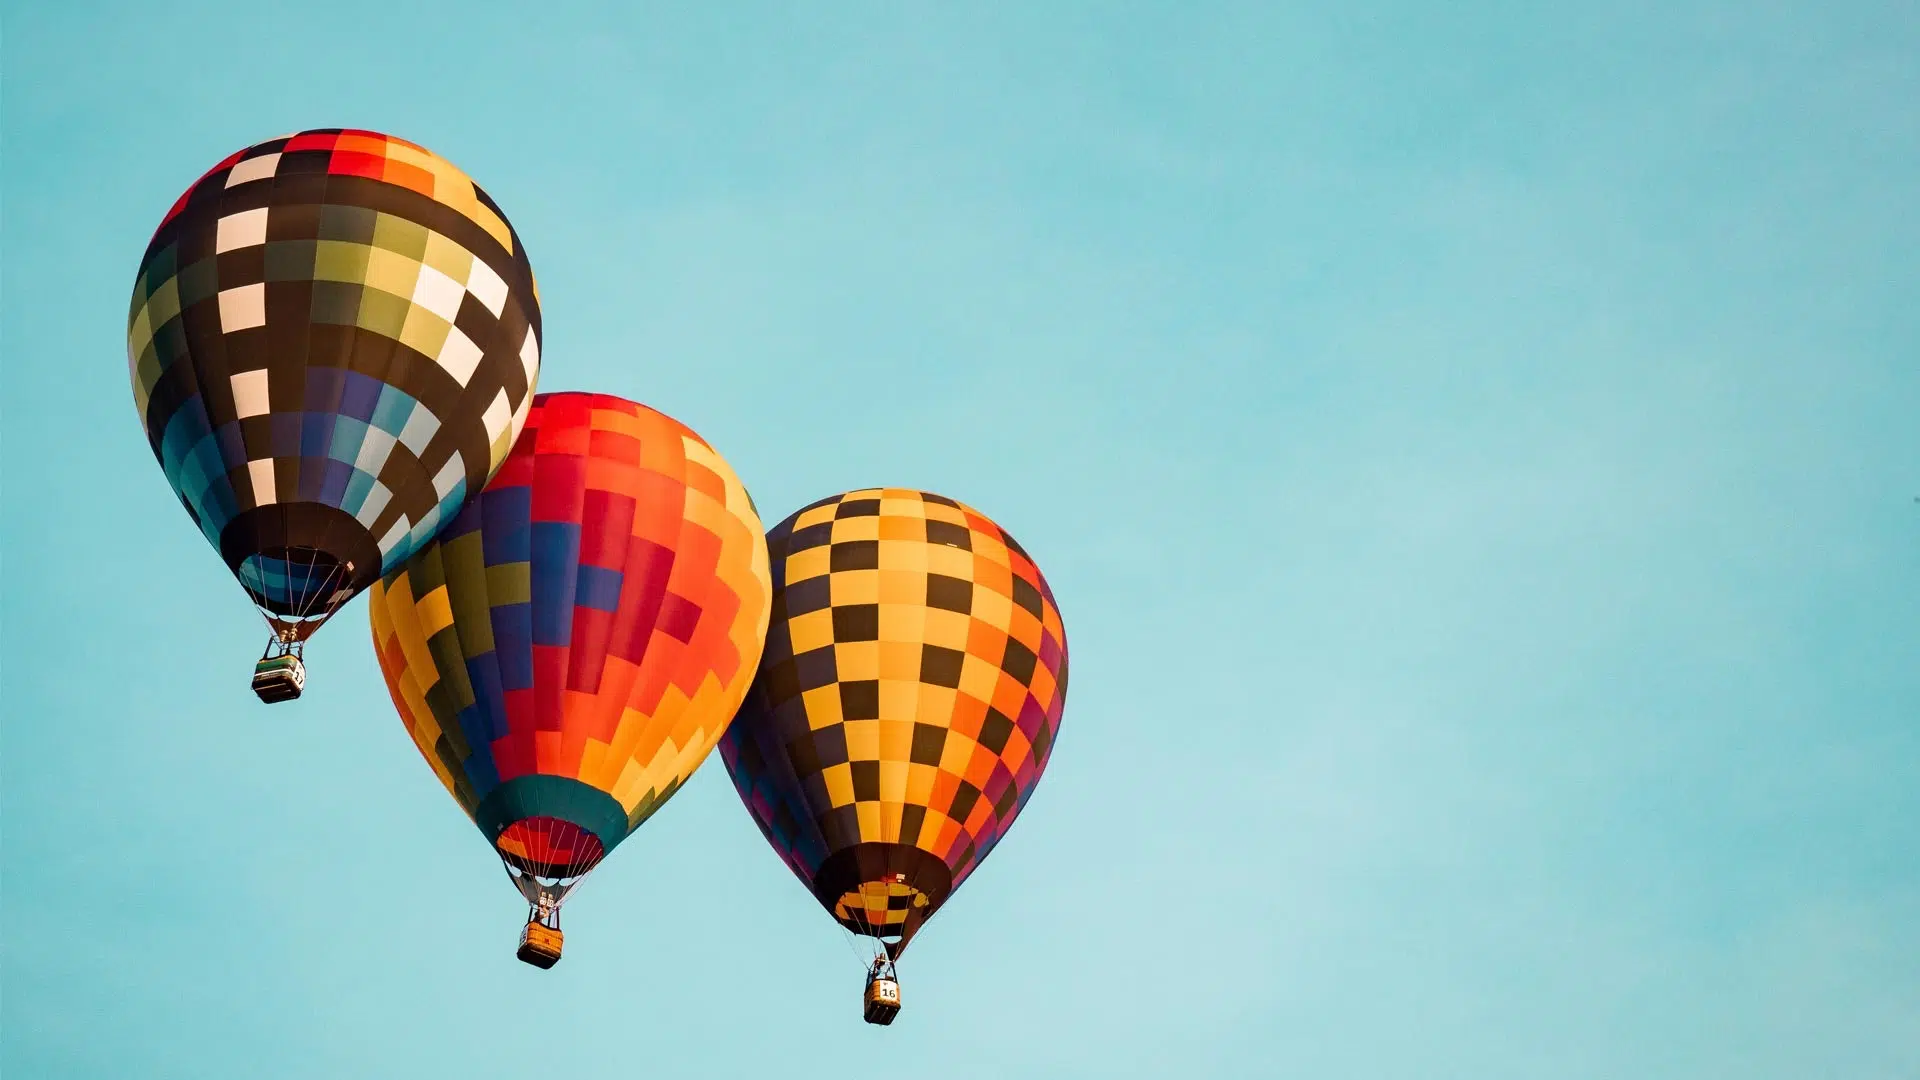 Three Hot Air Balloons in the Sky